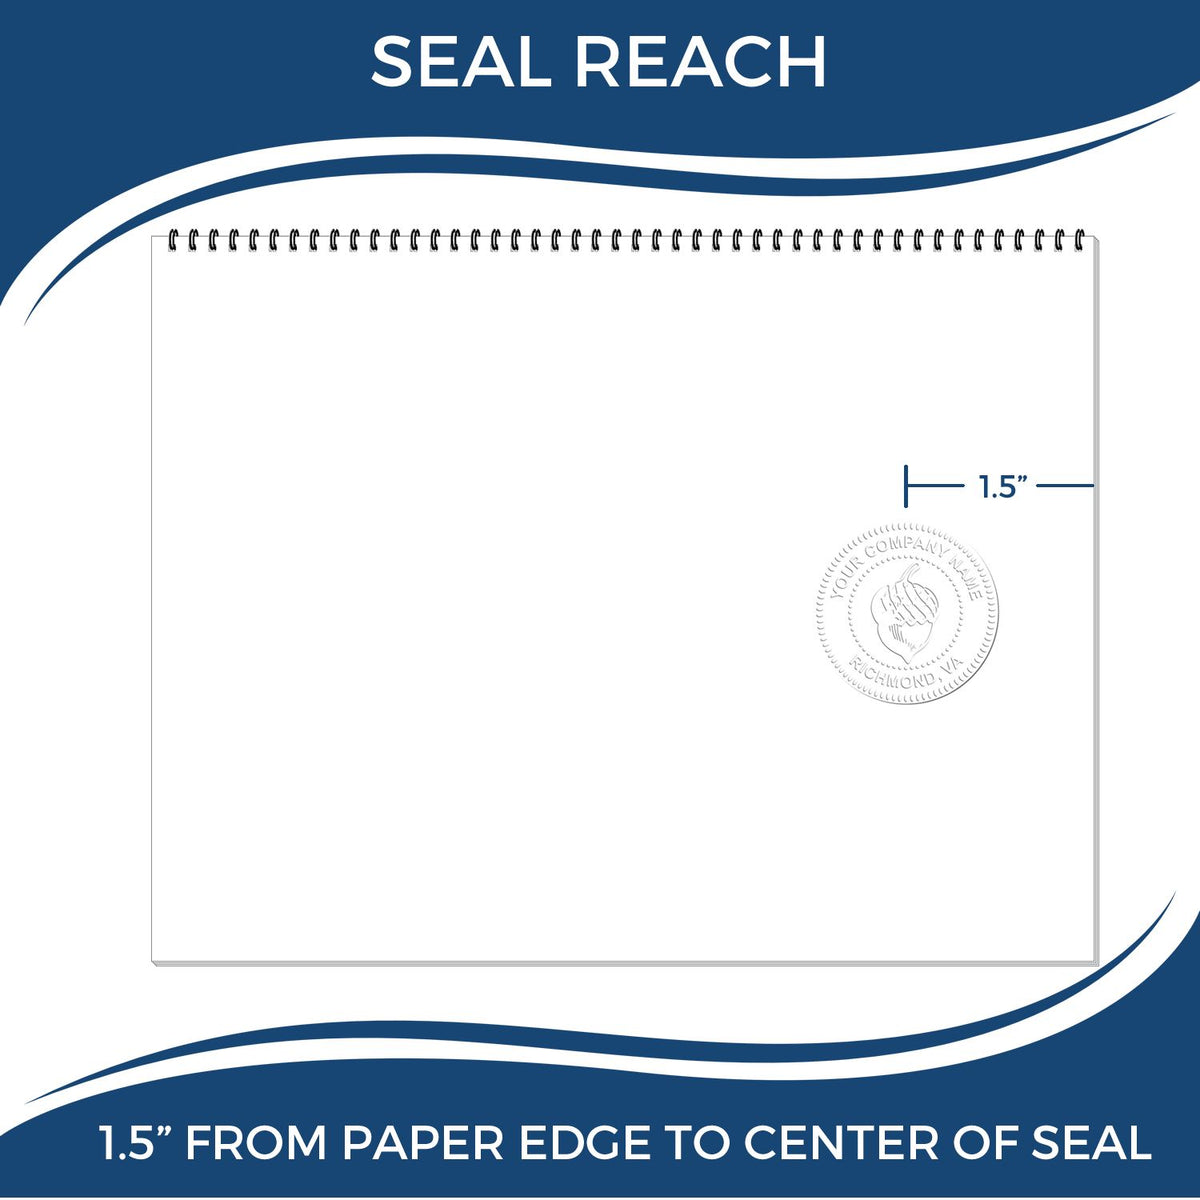 An infographic showing the seal reach which is represented by a ruler and a miniature seal image of the Soft Michigan Professional Geologist Seal